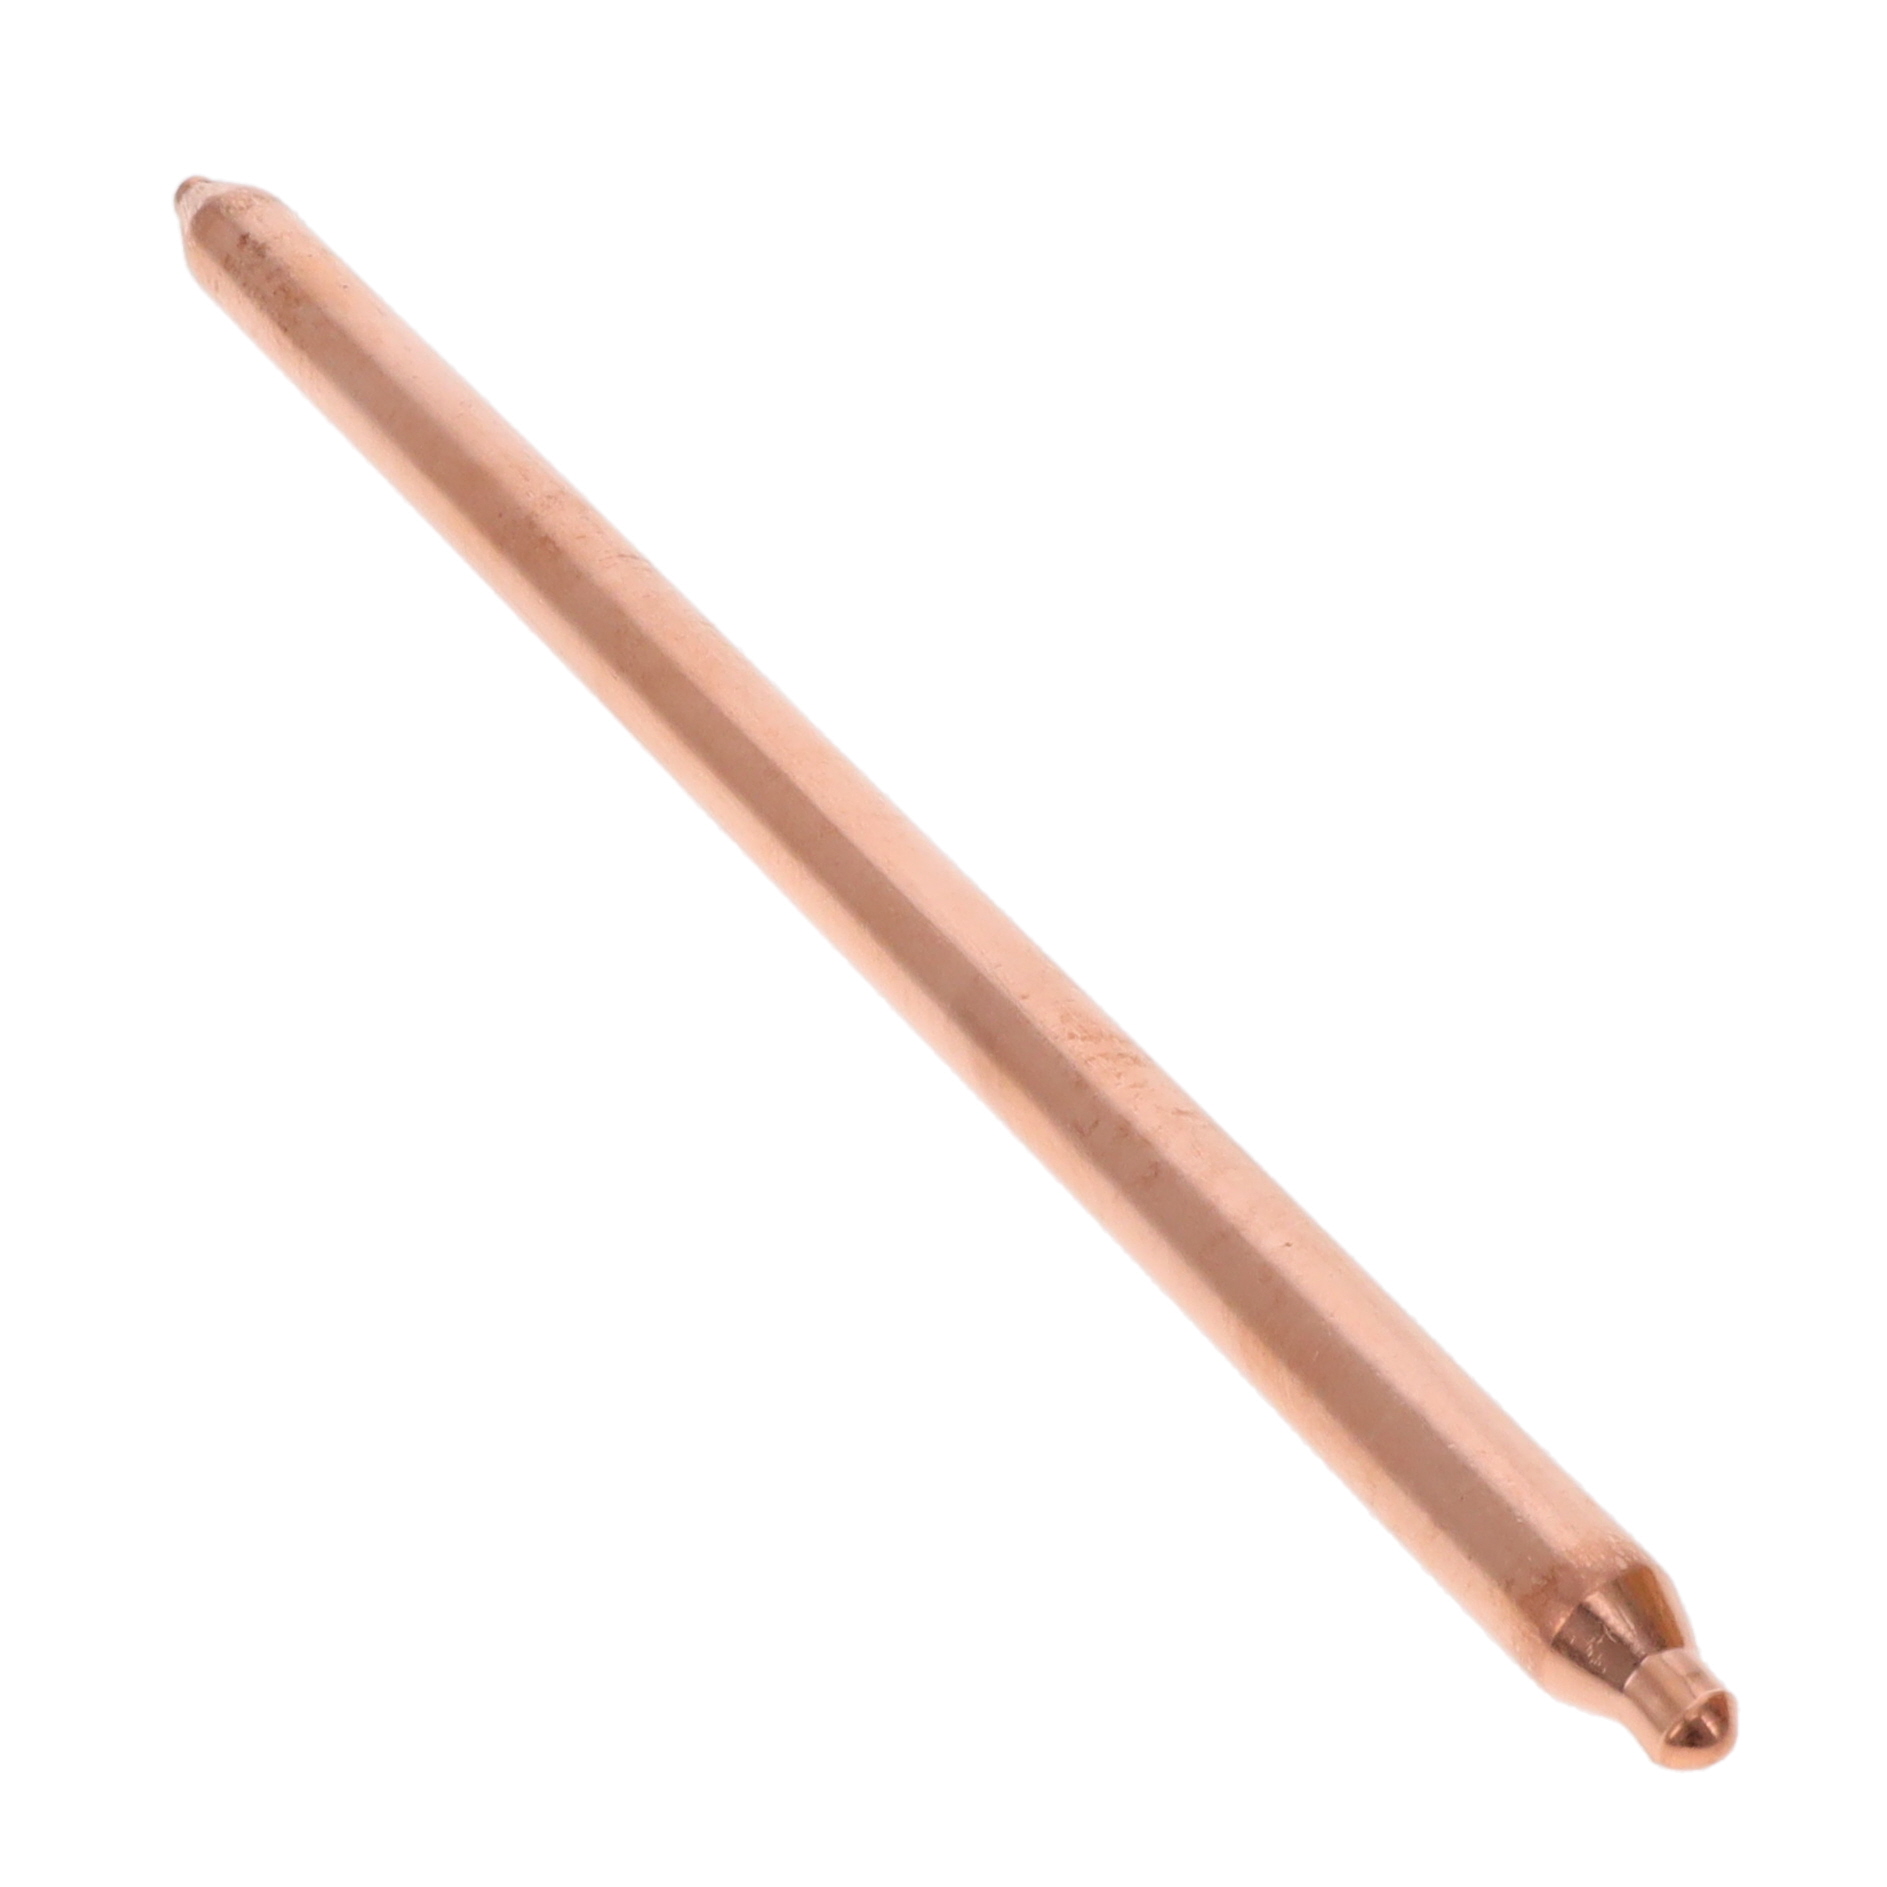 【HP-CWS-R10-216-K】COPPER-WATER HEAT PIPE, ROUND, D